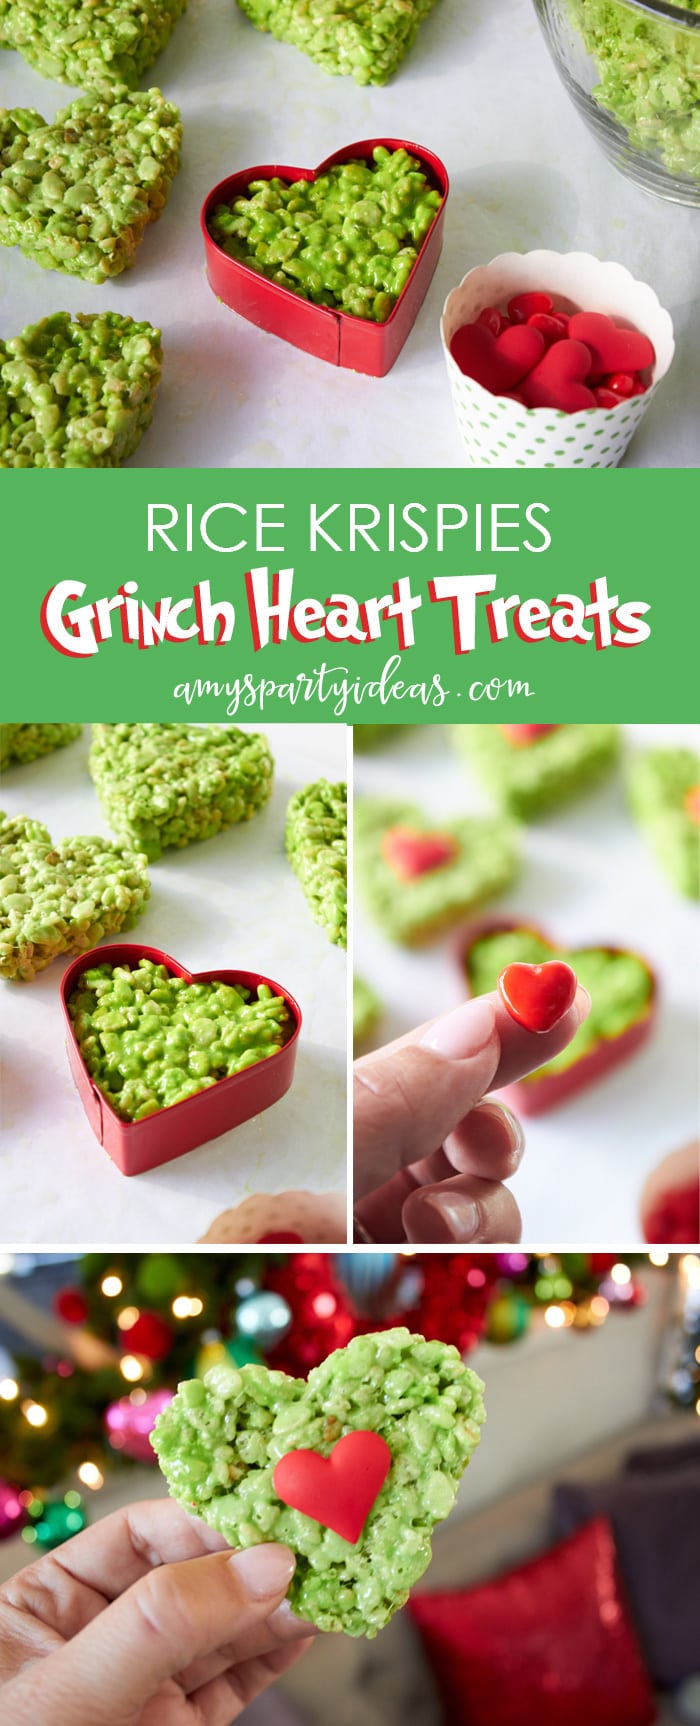 Rice Krispies Grinch Heart Treats |Have a Holiday Family Movie Night | SImple party ideas for movie night at home from AmysPartyIdeas.com | #TidingsAndTreats #ad | FREE Printables Grinch Movie